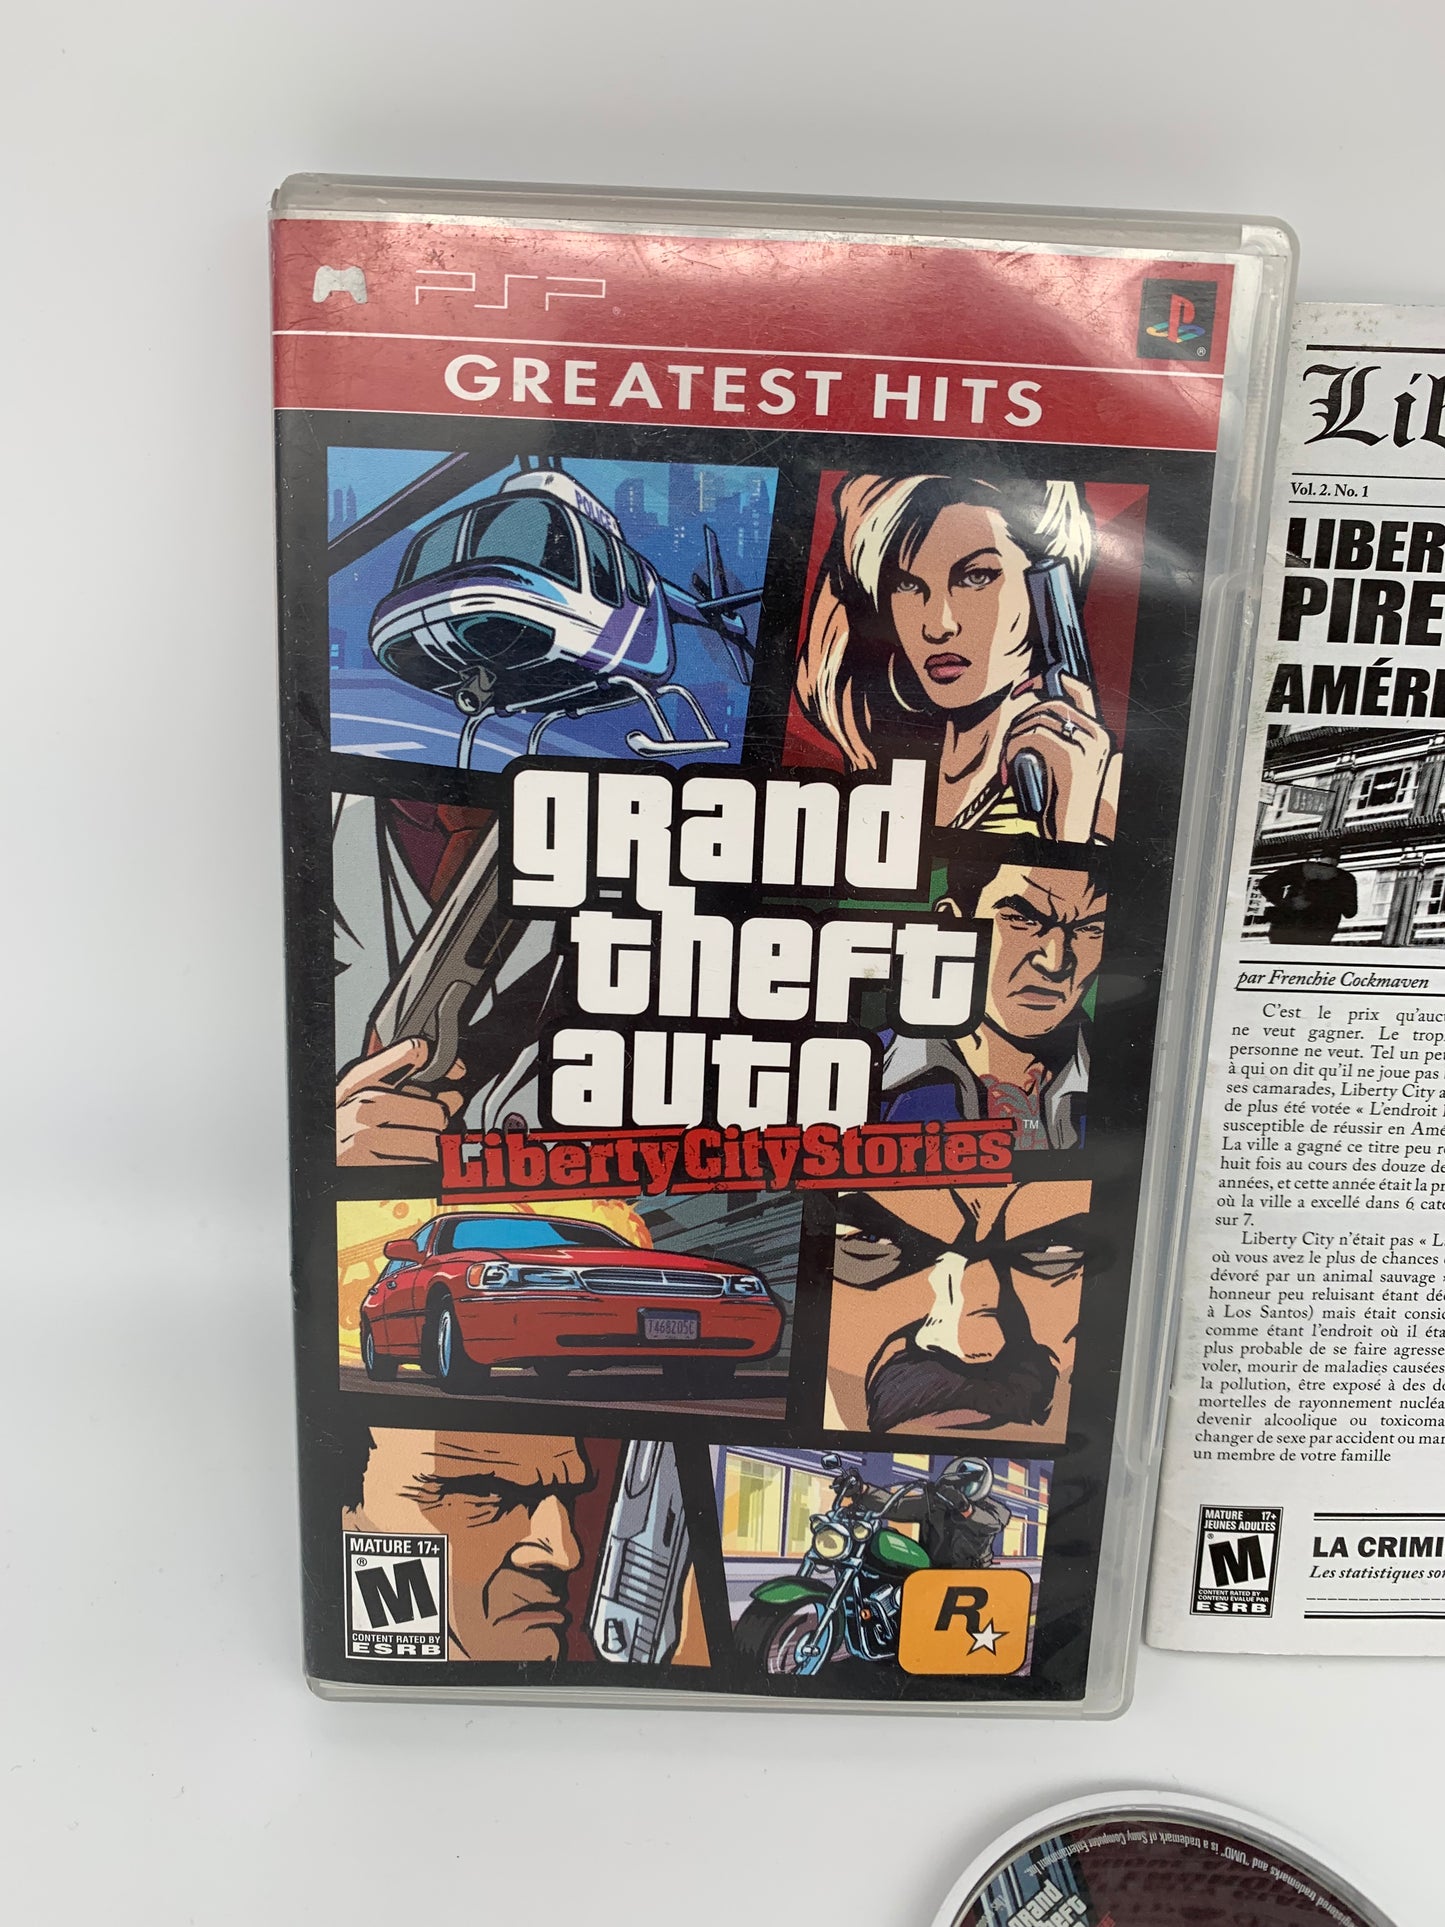 SONY PLAYSTATiON PORTABLE [PSP] | GRAND THEFT AUTO LiBERTY CiTY STORiES | GREATEST HiTS